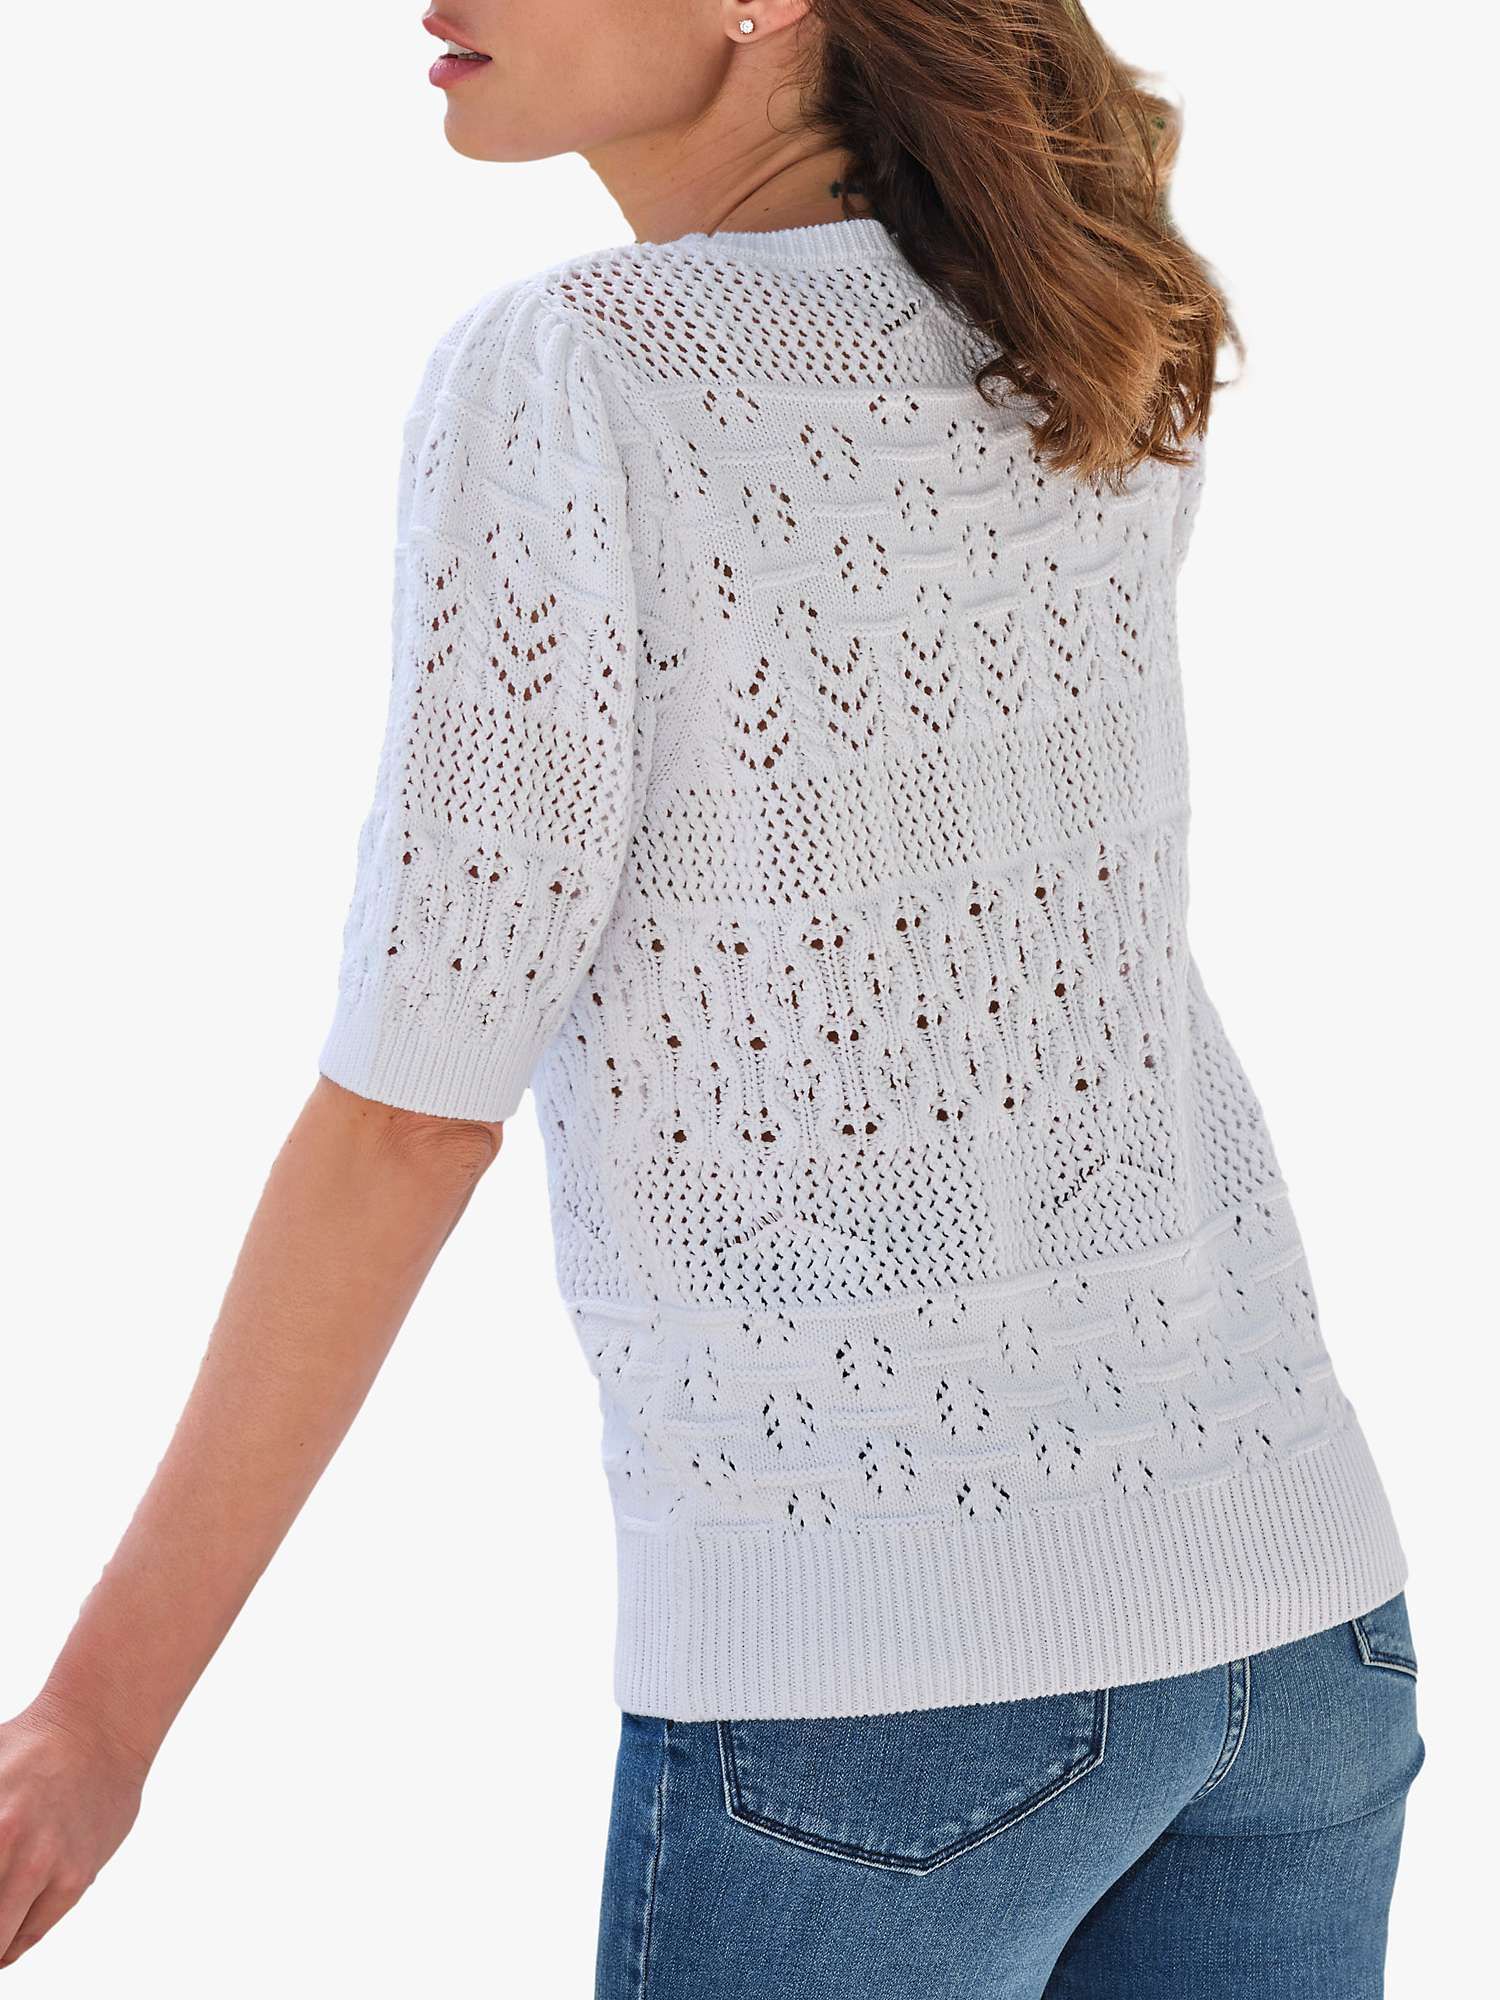 Buy Pure Collection Crochet Cotton Top, White Online at johnlewis.com